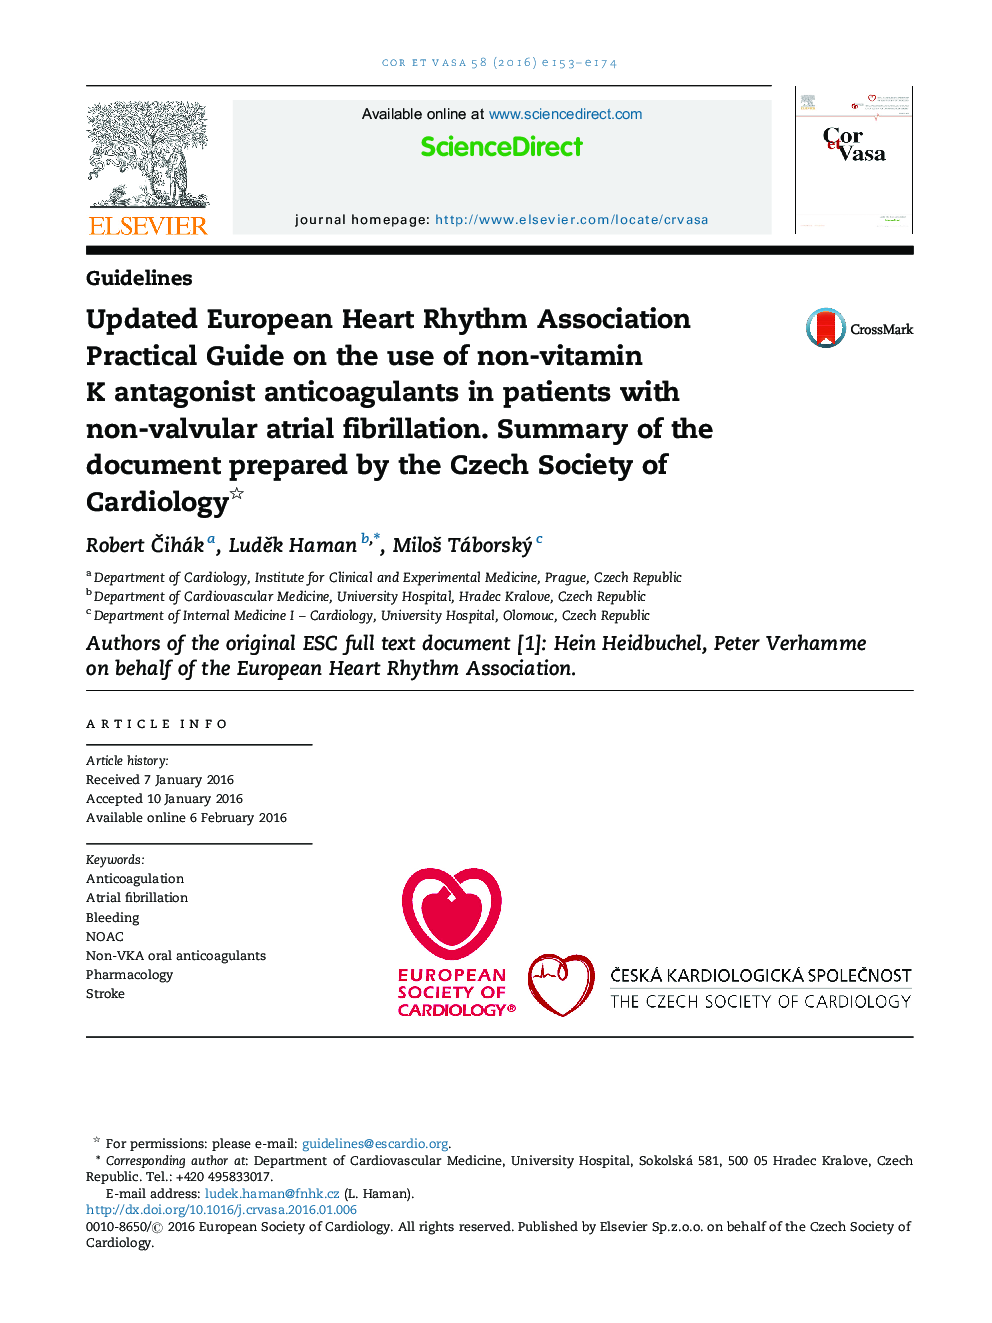 Updated European Heart Rhythm Association Practical Guide on the use of non-vitamin K antagonist anticoagulants in patients with non-valvular atrial fibrillation. Summary of the document prepared by the Czech Society of Cardiology